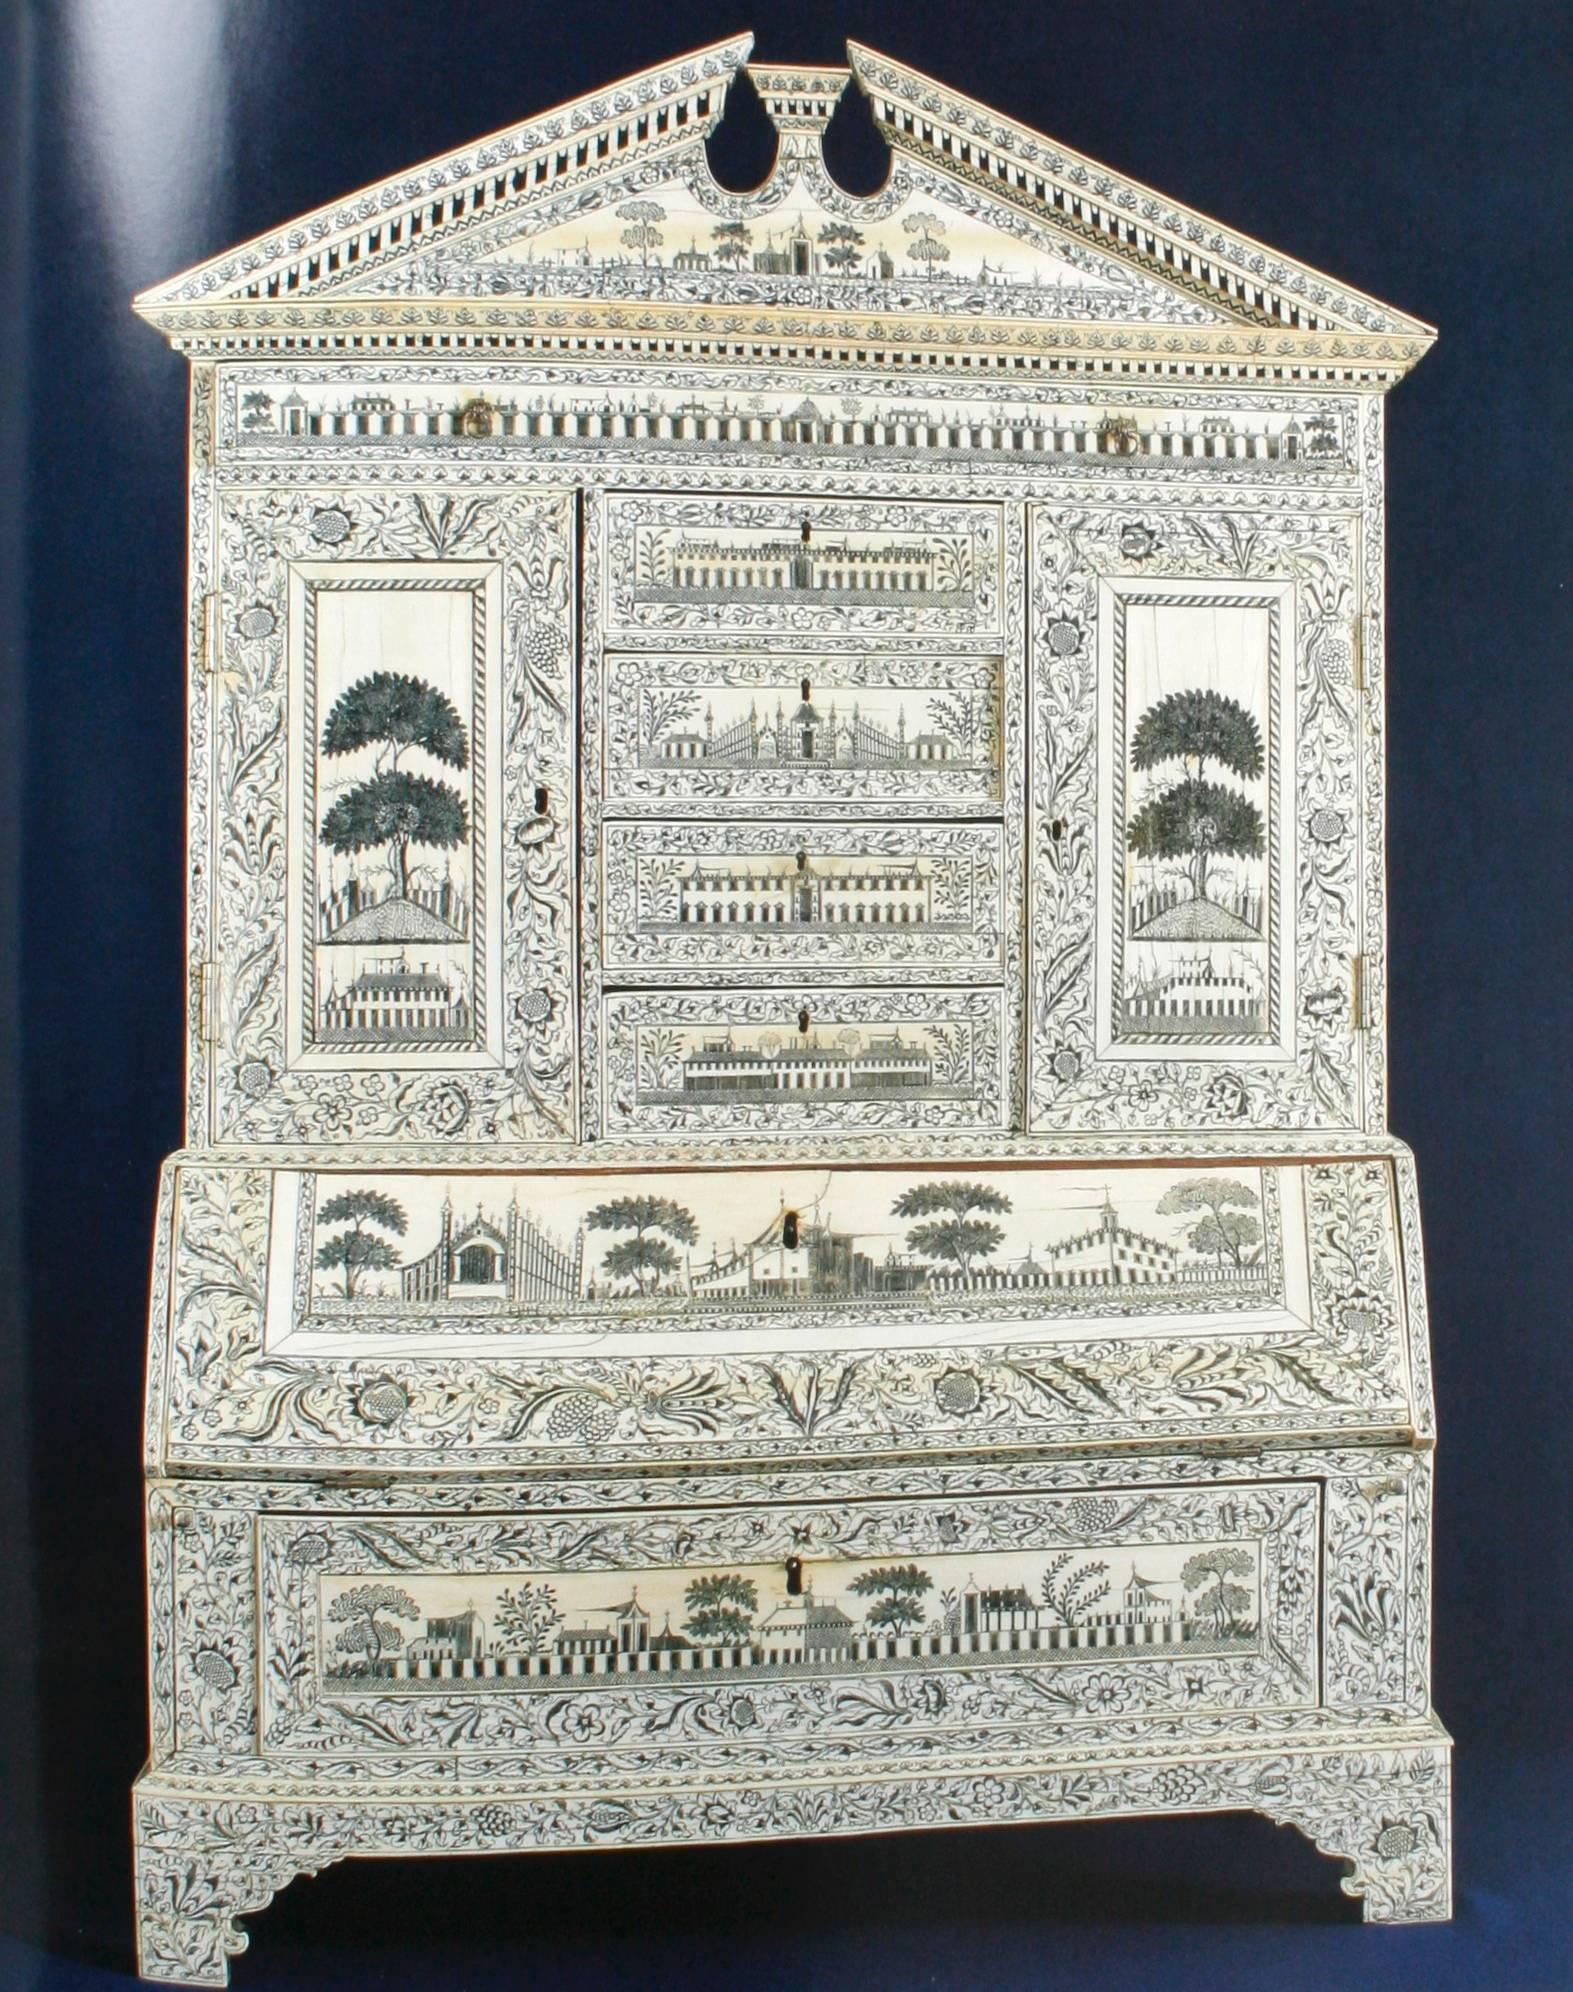 Furniture from British India and Ceylon by Amin Jaffer. Salem: Peobody Essex Museum, 2001. First edition hardcover with dust jacket. 416 pp. A book on the collections in The Victoria and Albert Museum and The Peabody Essex Museum of furniture from